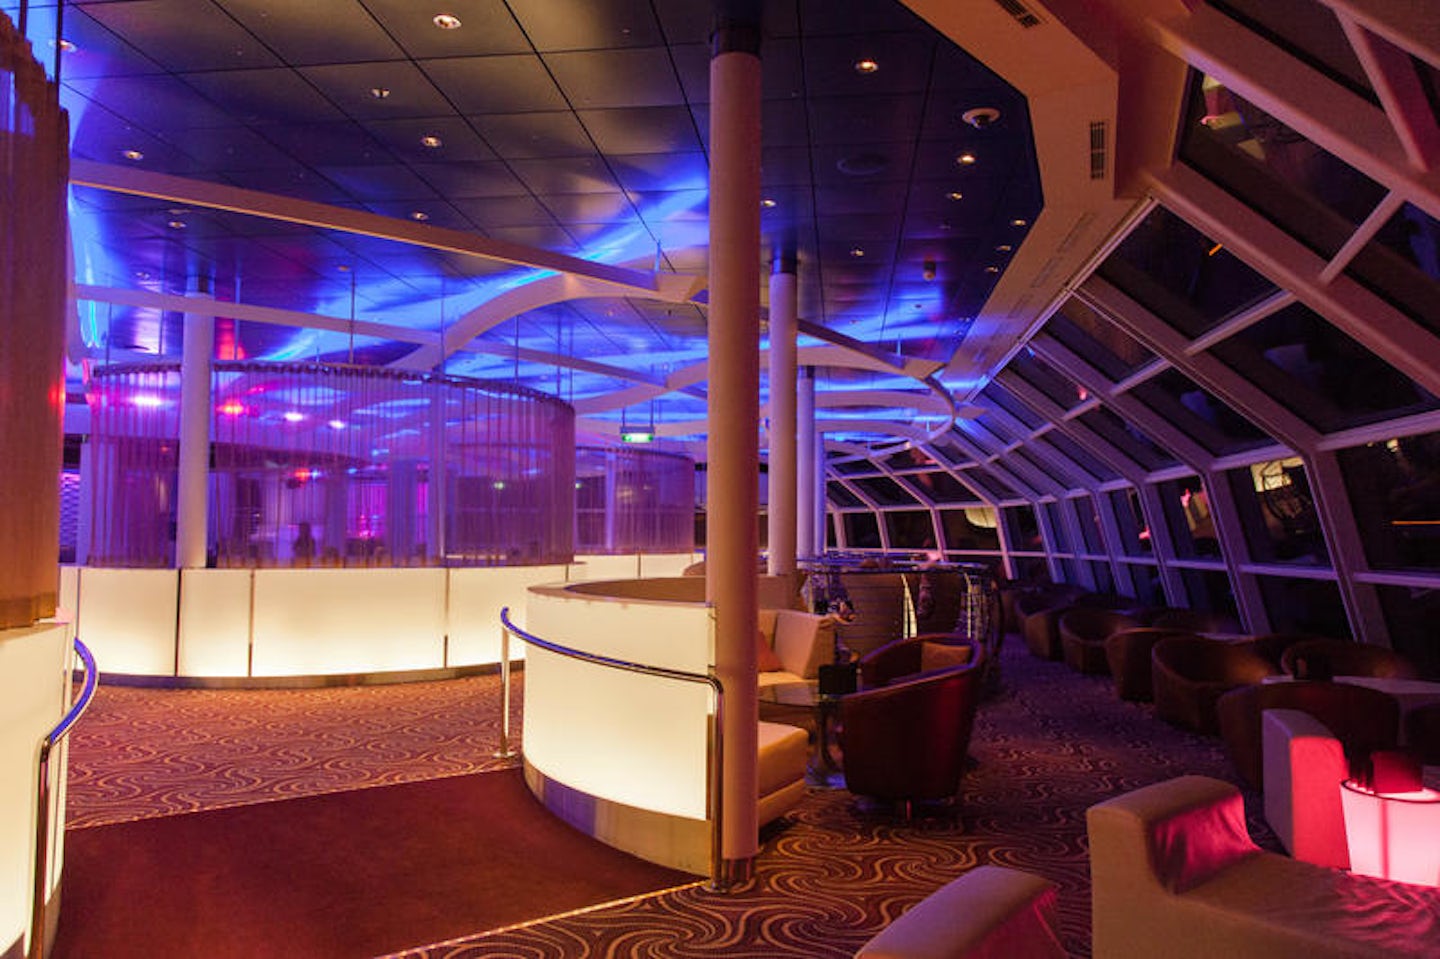 The 80s Party on Celebrity Equinox